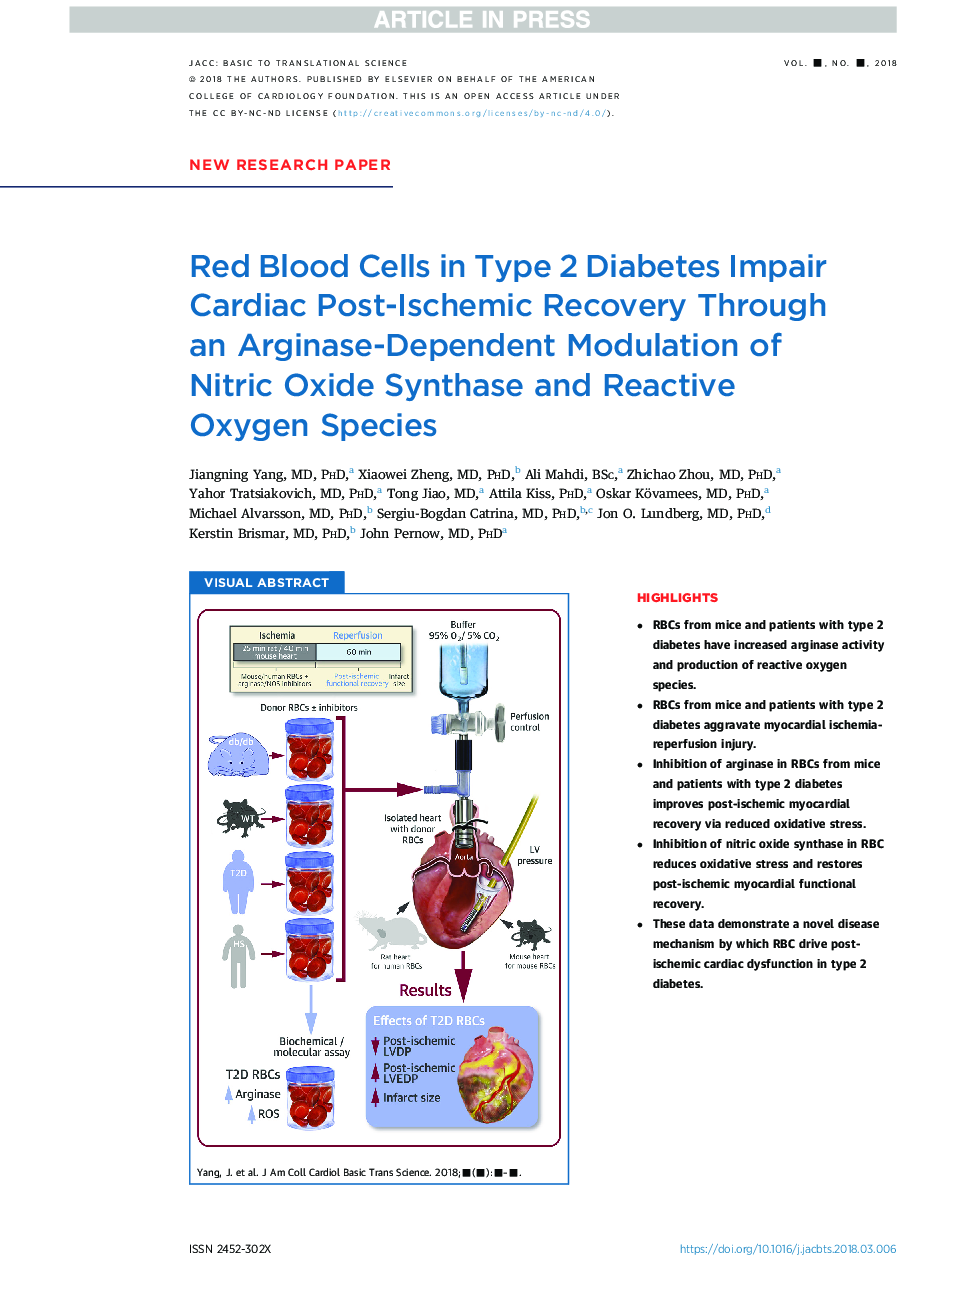 Red Blood Cells in Type 2 Diabetes Impair Cardiac Post-Ischemic Recovery Through an Arginase-Dependent Modulation of Nitric Oxide Synthase and Reactive Oxygen Species